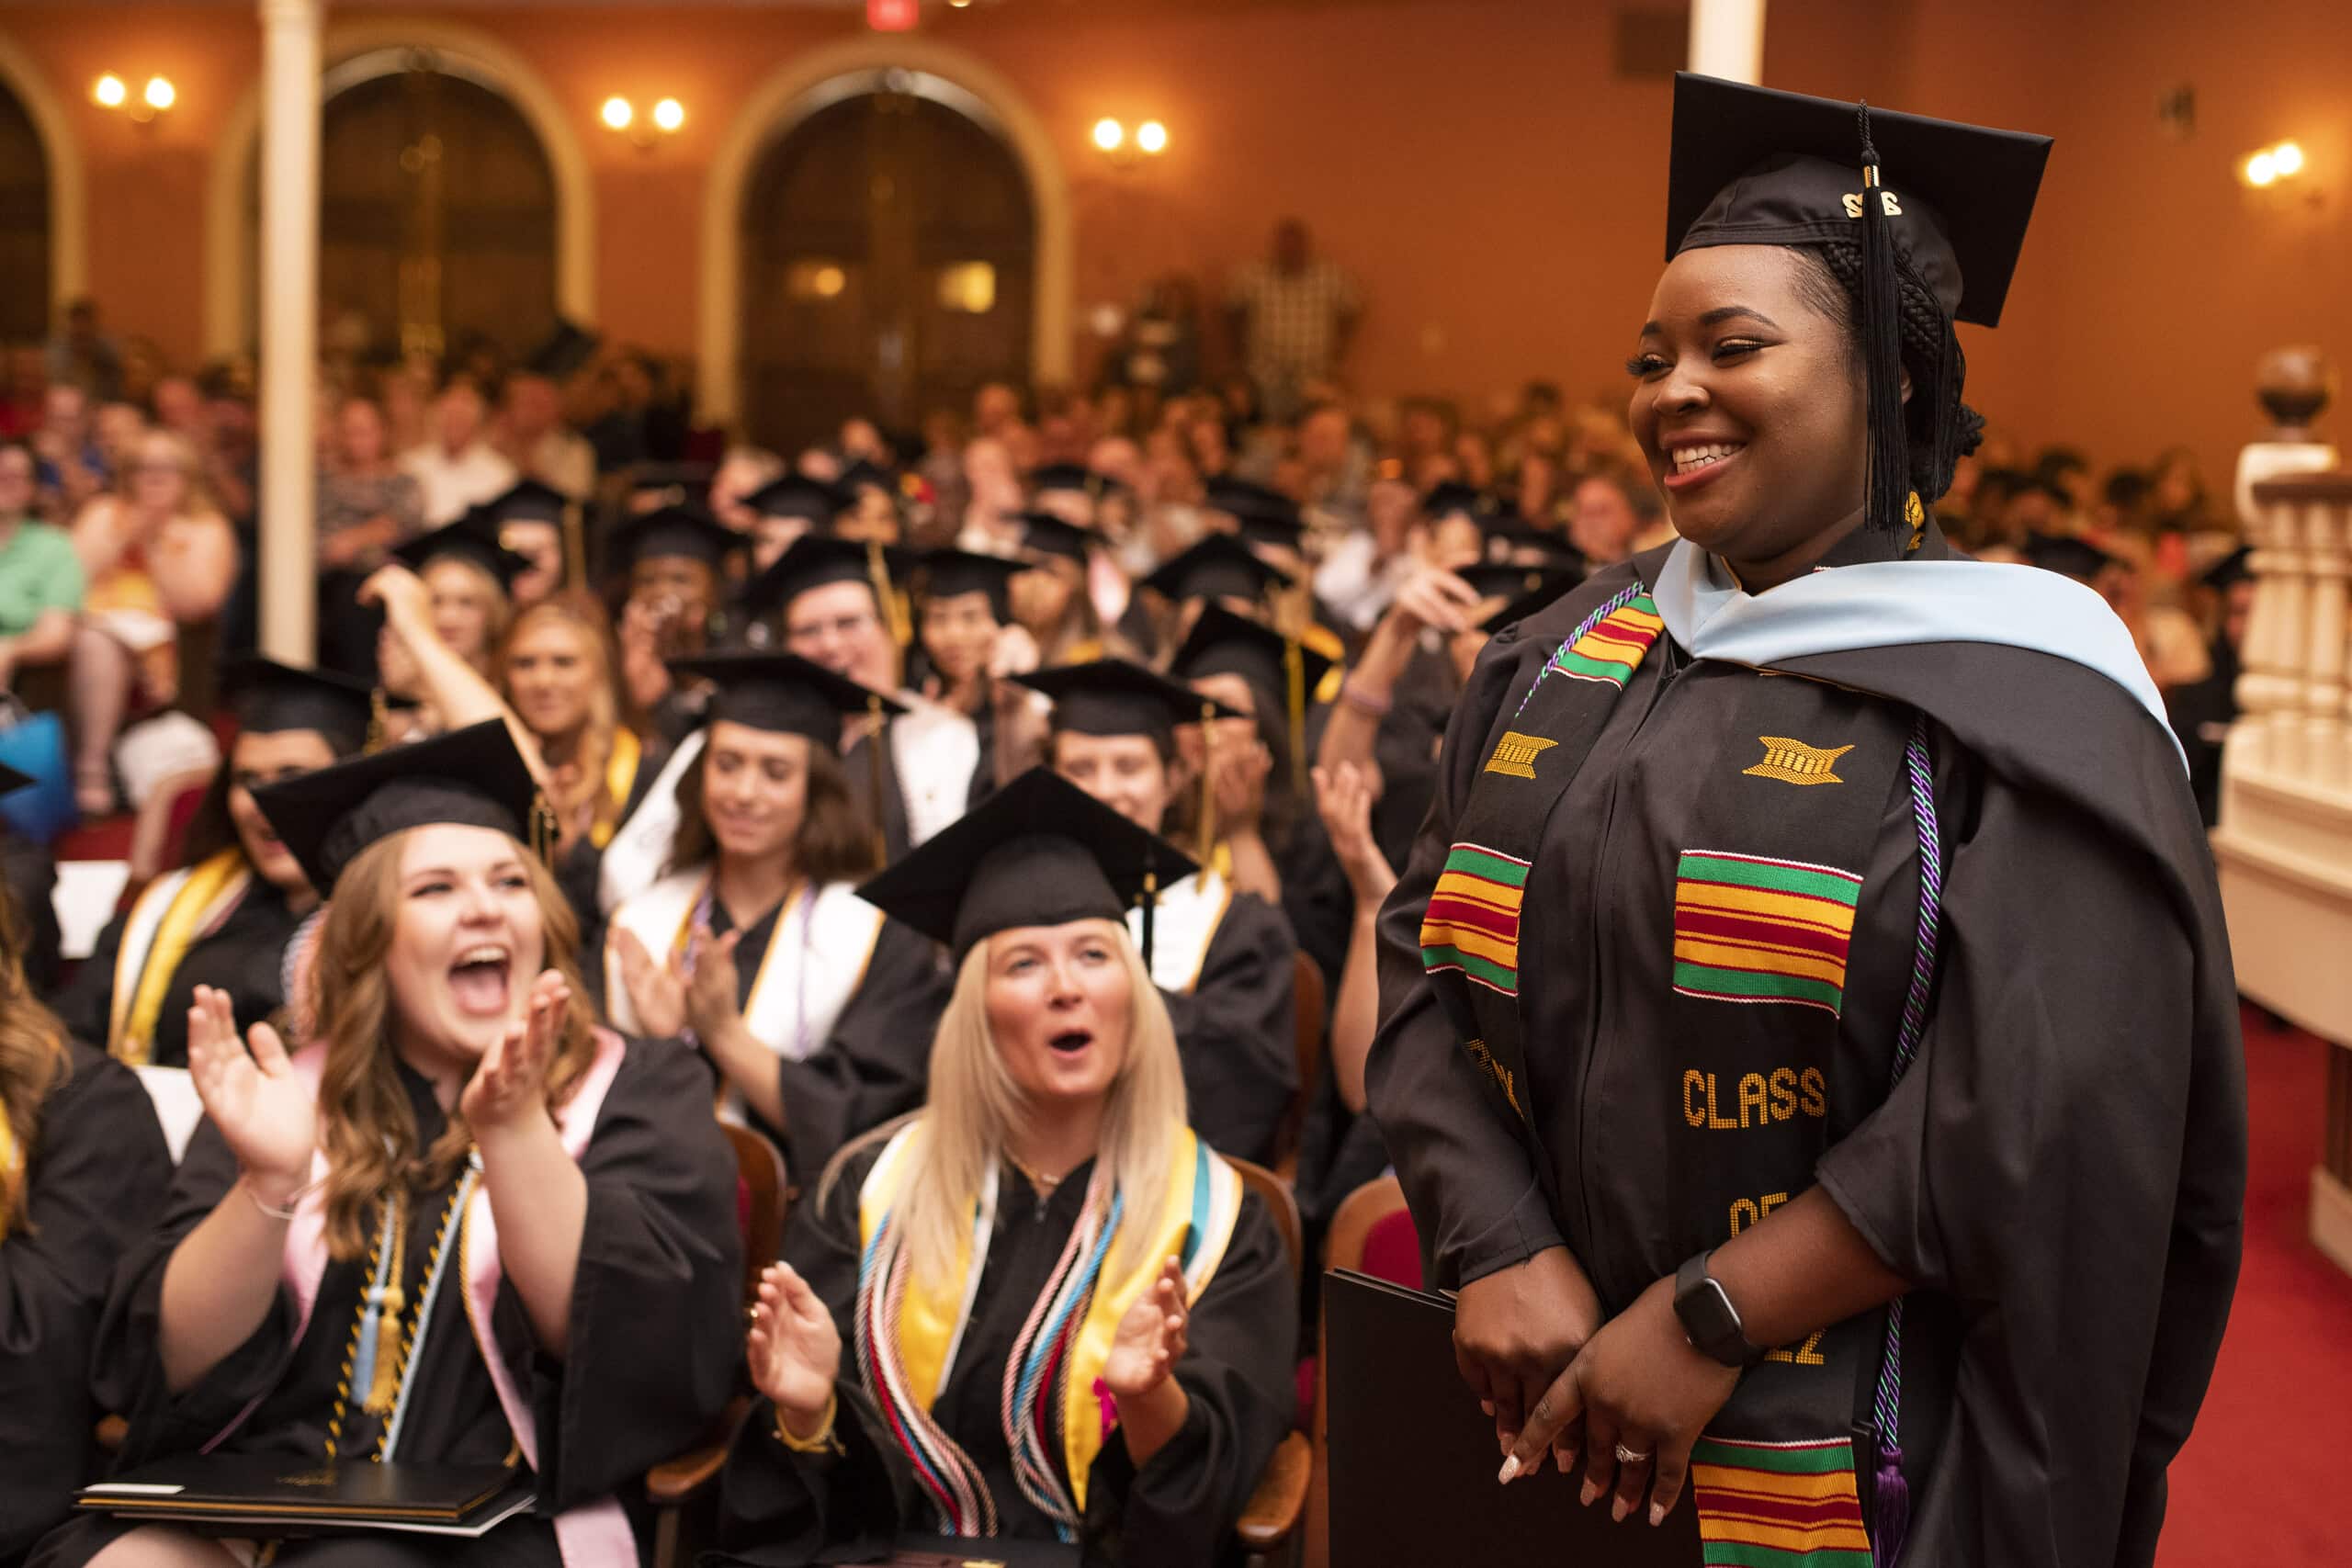 Seated audience of young women in graduation attire applaud a standing young women in graduation robes